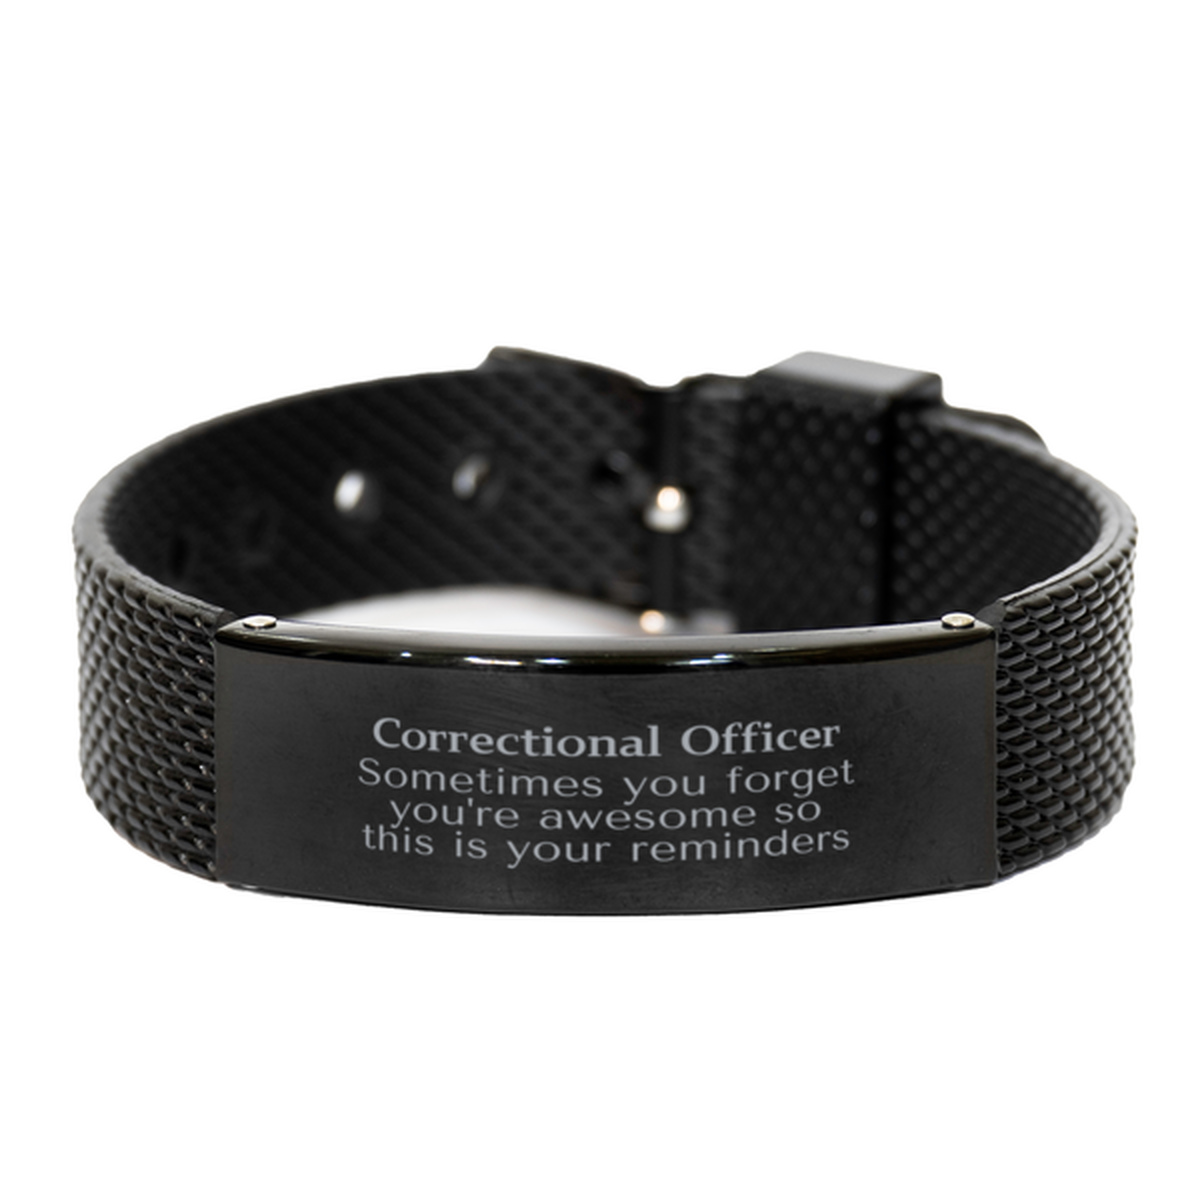 Sentimental Correctional Officer Black Shark Mesh Bracelet, Correctional Officer Sometimes you forget you're awesome so this is your reminders, Graduation Christmas Birthday Gifts for Correctional Officer, Men, Women, Coworkers